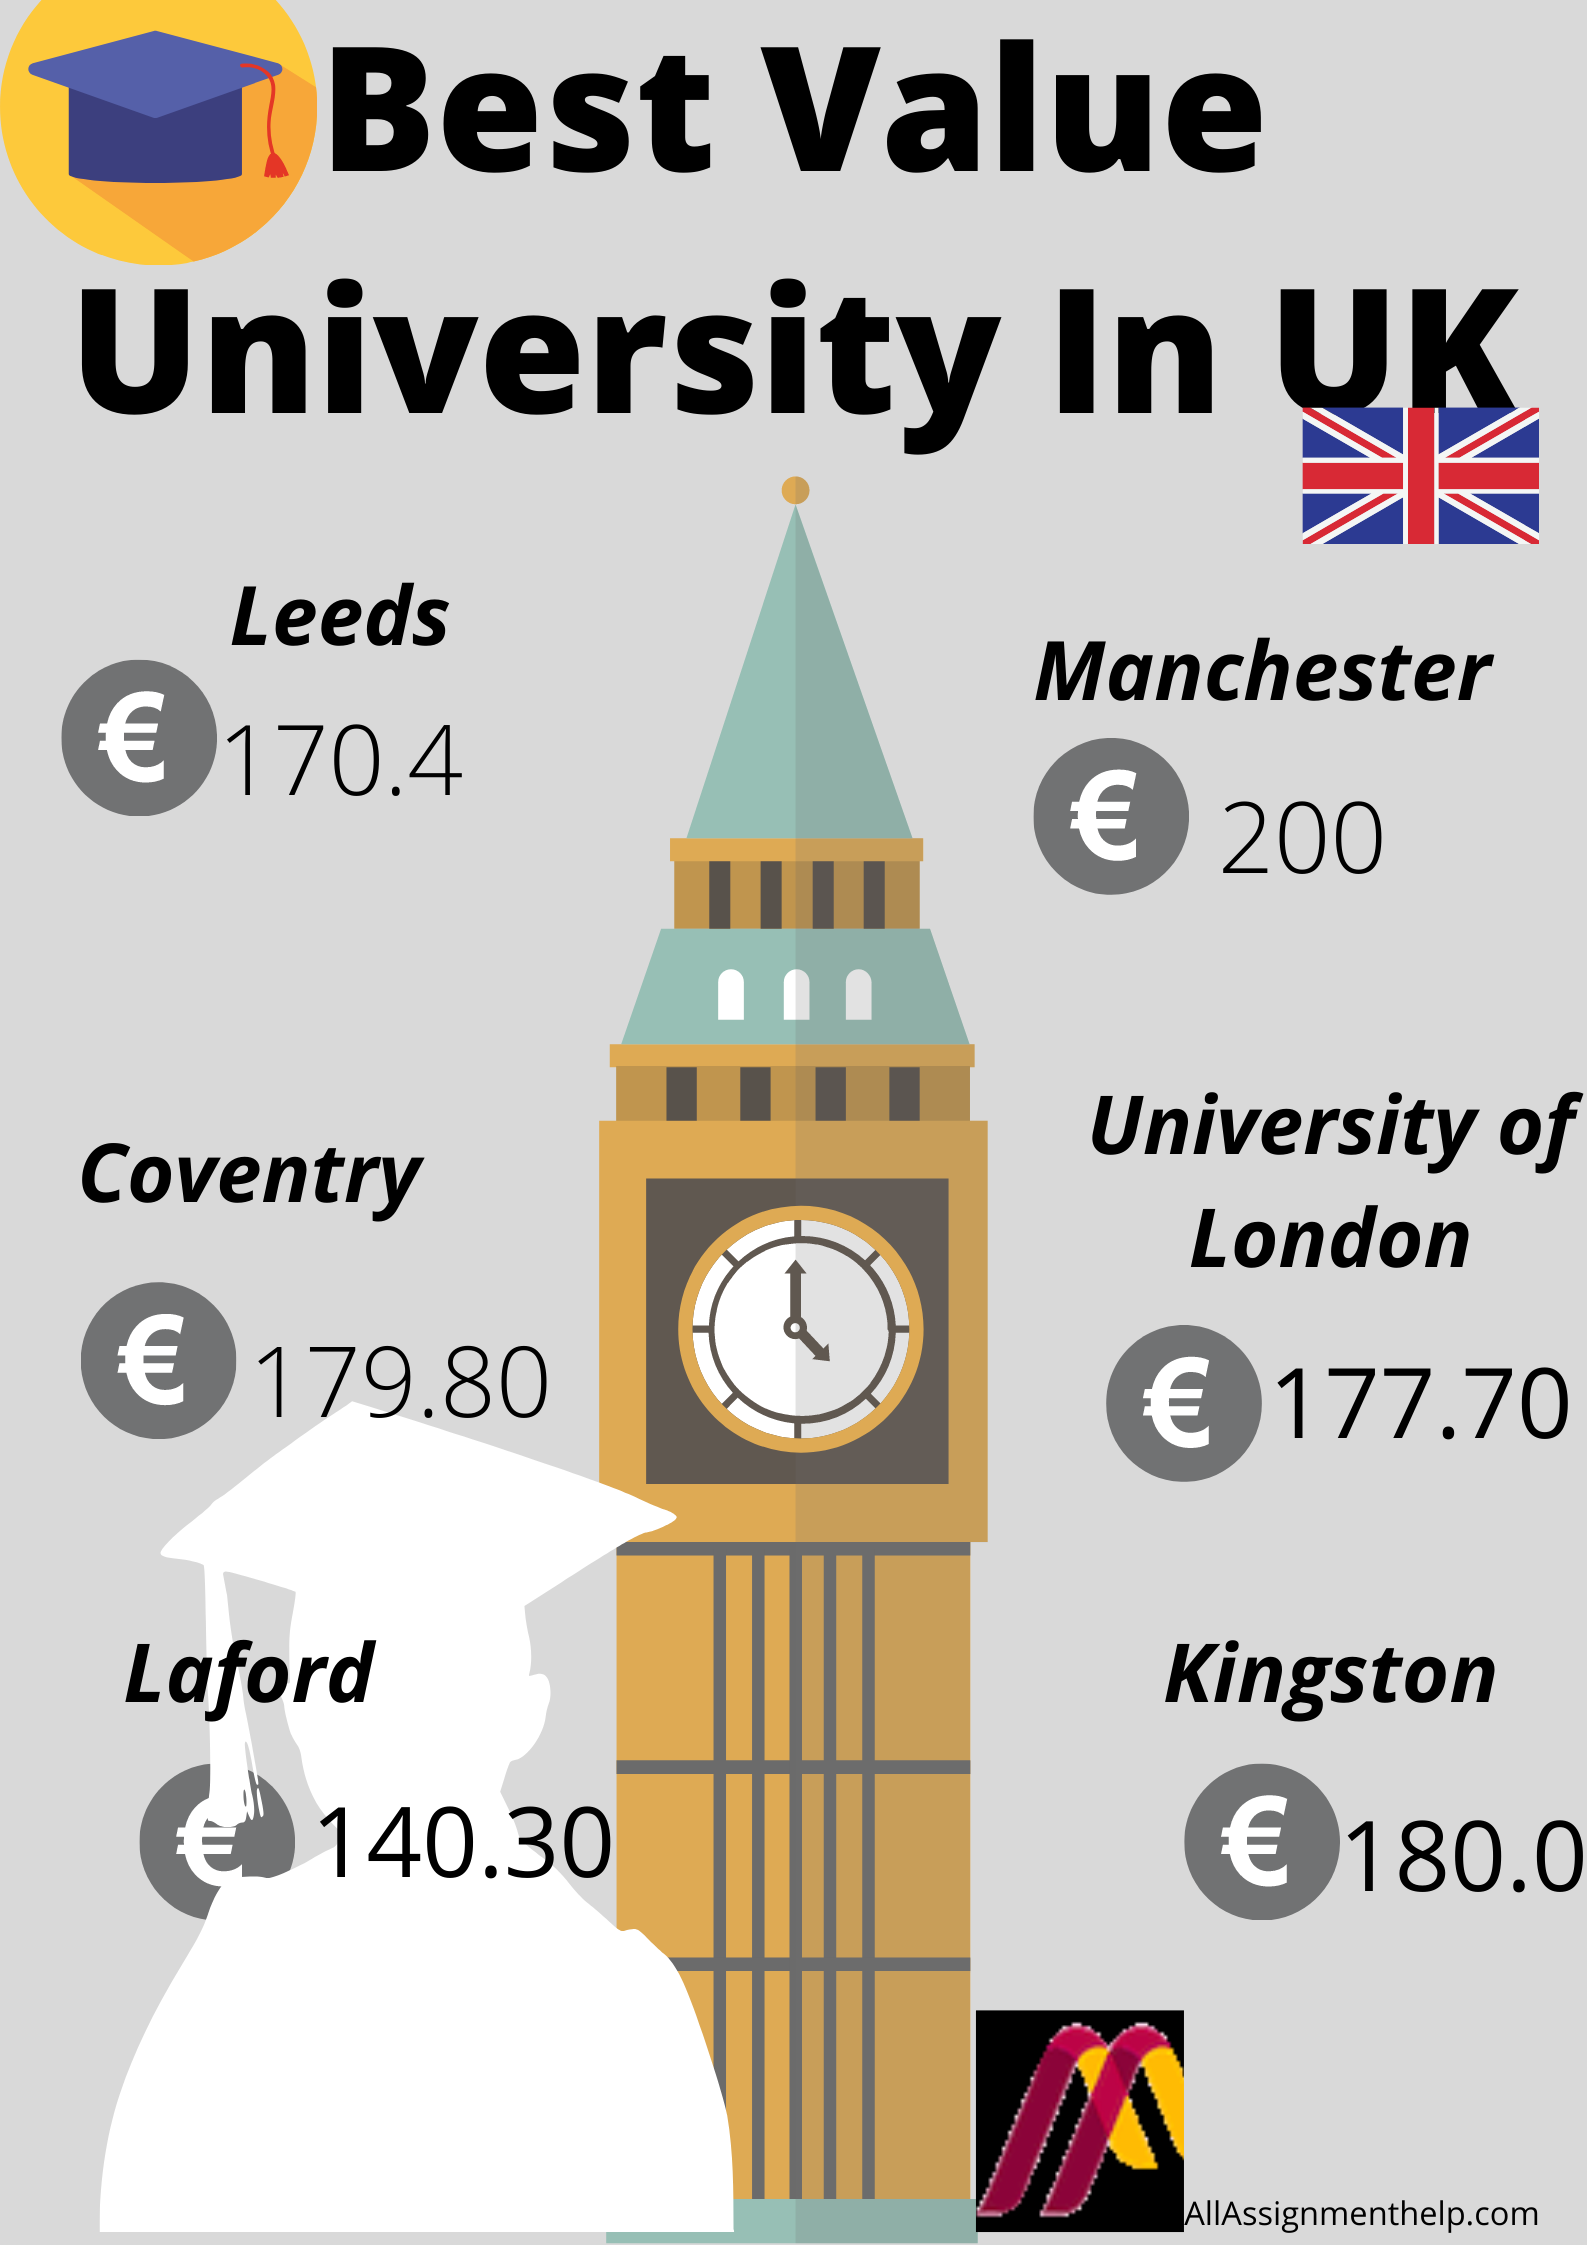 Financial state to study in UK